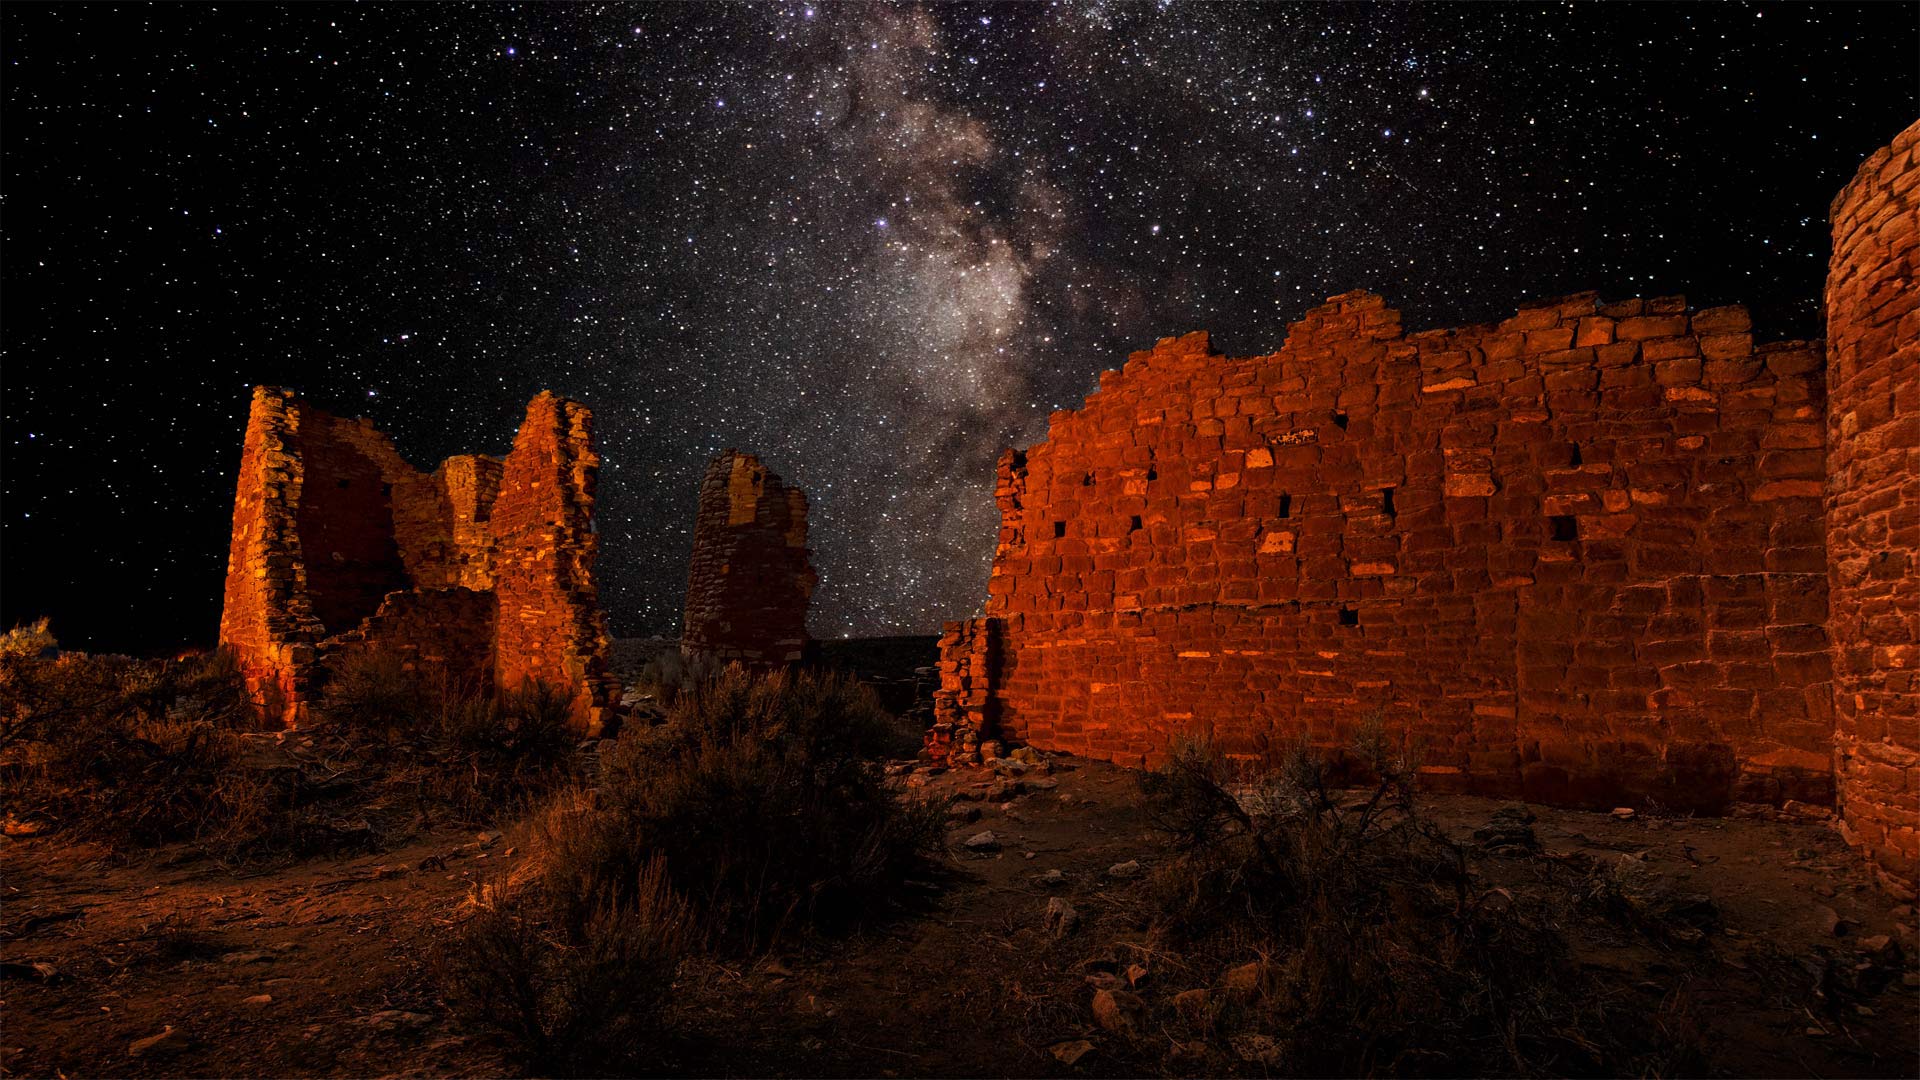 Square Tower Group in Hovenweep National Monument, Utah - Brad McGinley Photography/Getty Images)